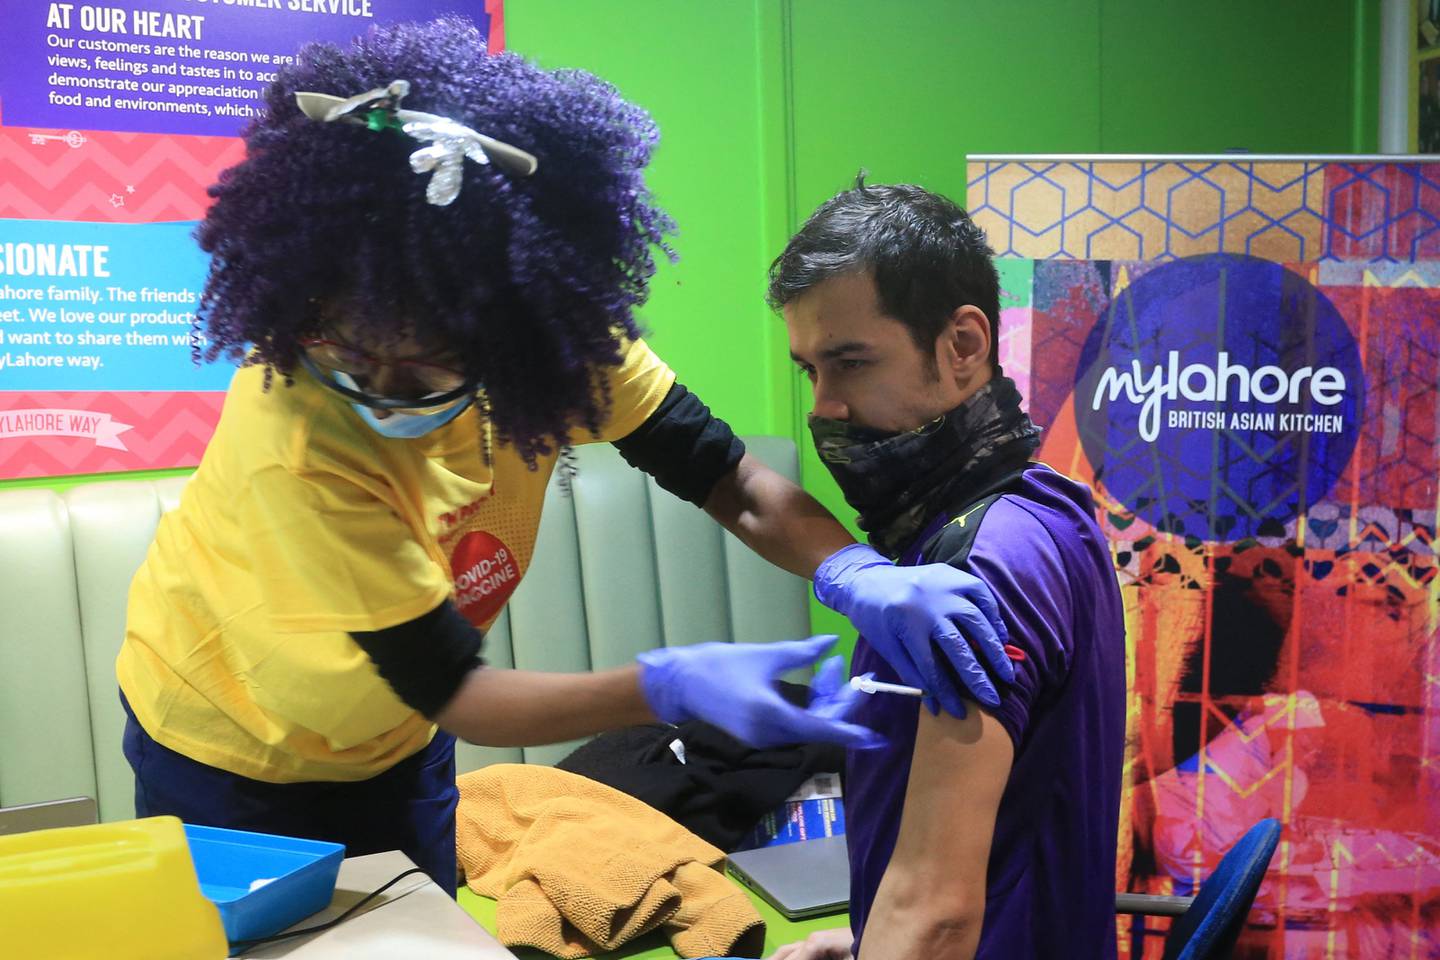 A health worker gives a man a Covid booster jab at a pop-up vaccination centre at the MyLahore British Asian Kitchen in Bradford, West Yorkshire.  AFP